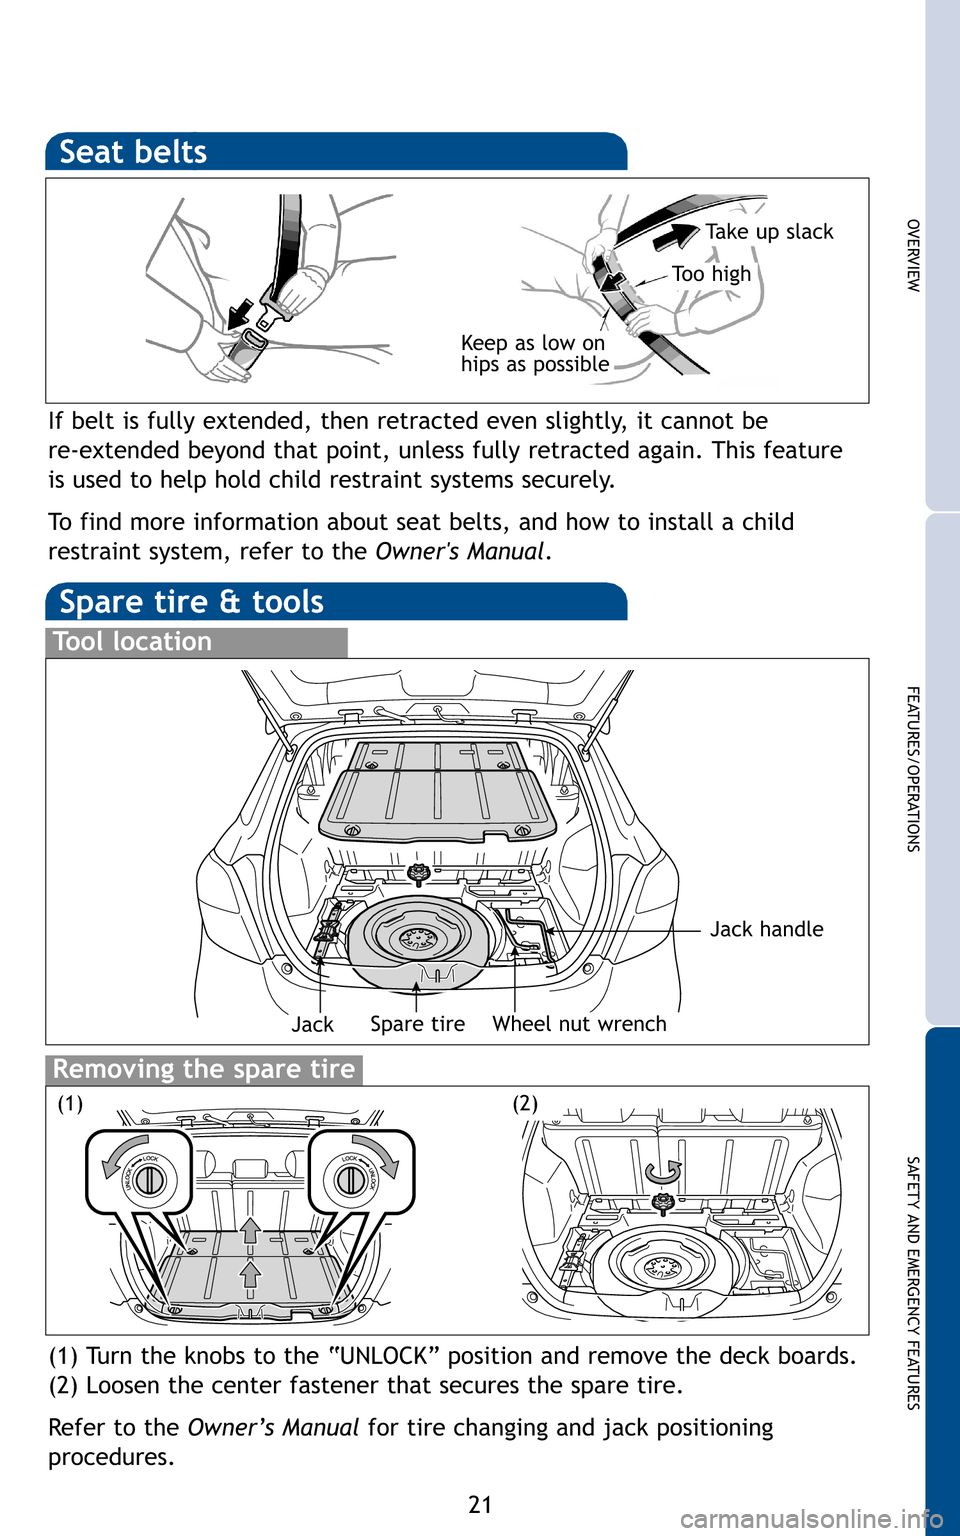 TOYOTA MATRIX 2011 E140 / 2.G Quick Reference Guide 21
OVERVIEW
FEATURES/OPERATIONS
SAFETY AND EMERGENCY FEATURES
If belt is fully extended, then retracted even slightly, it cannot be  
re-extended beyond that point, unless fully retracted again. This 